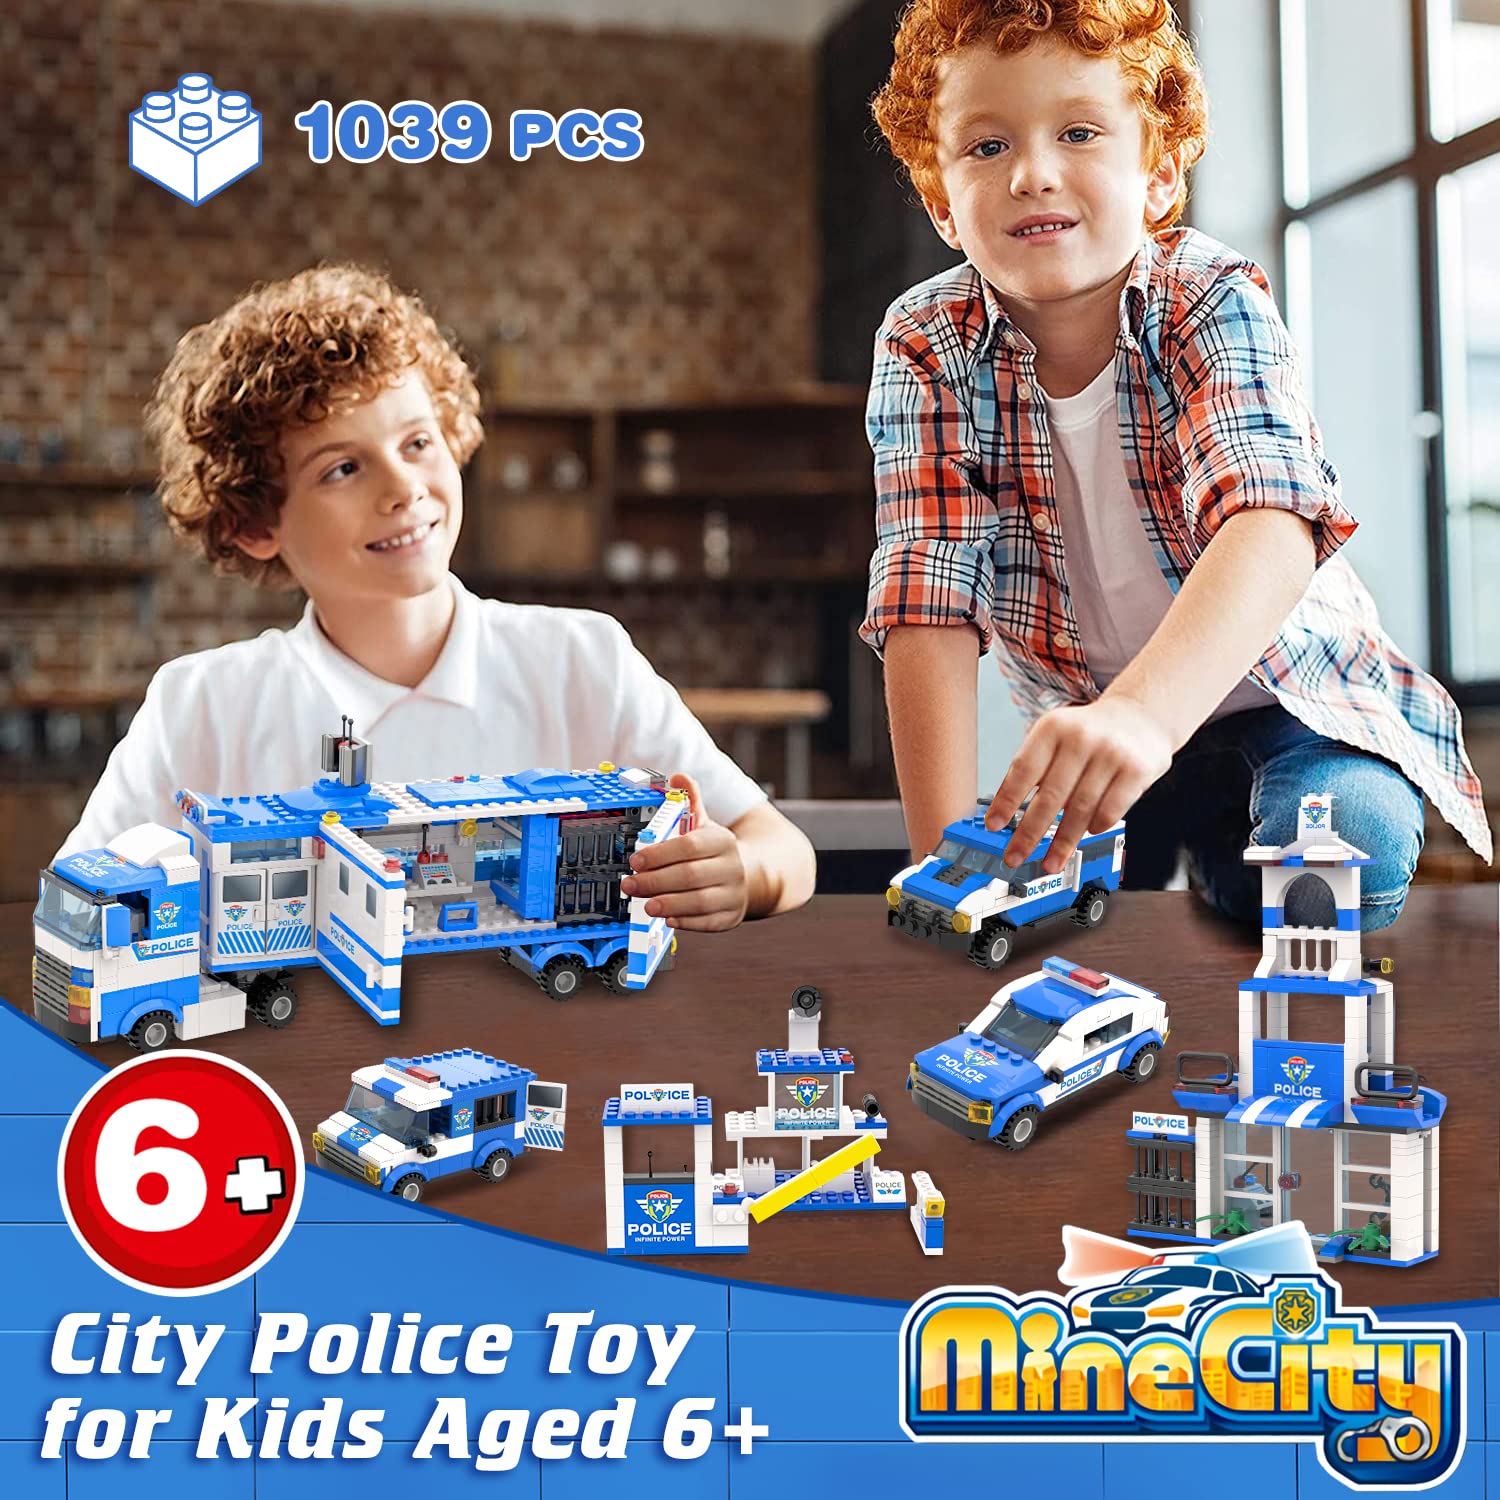 1039 Pieces City Police Station Building Set, 8 in 1 Mobile Command Center Building Toy with Cop Car, Helicopter, Boat, Best Learning Roleplay STEM Toy Gifts for Boys and Girls Age 6-12